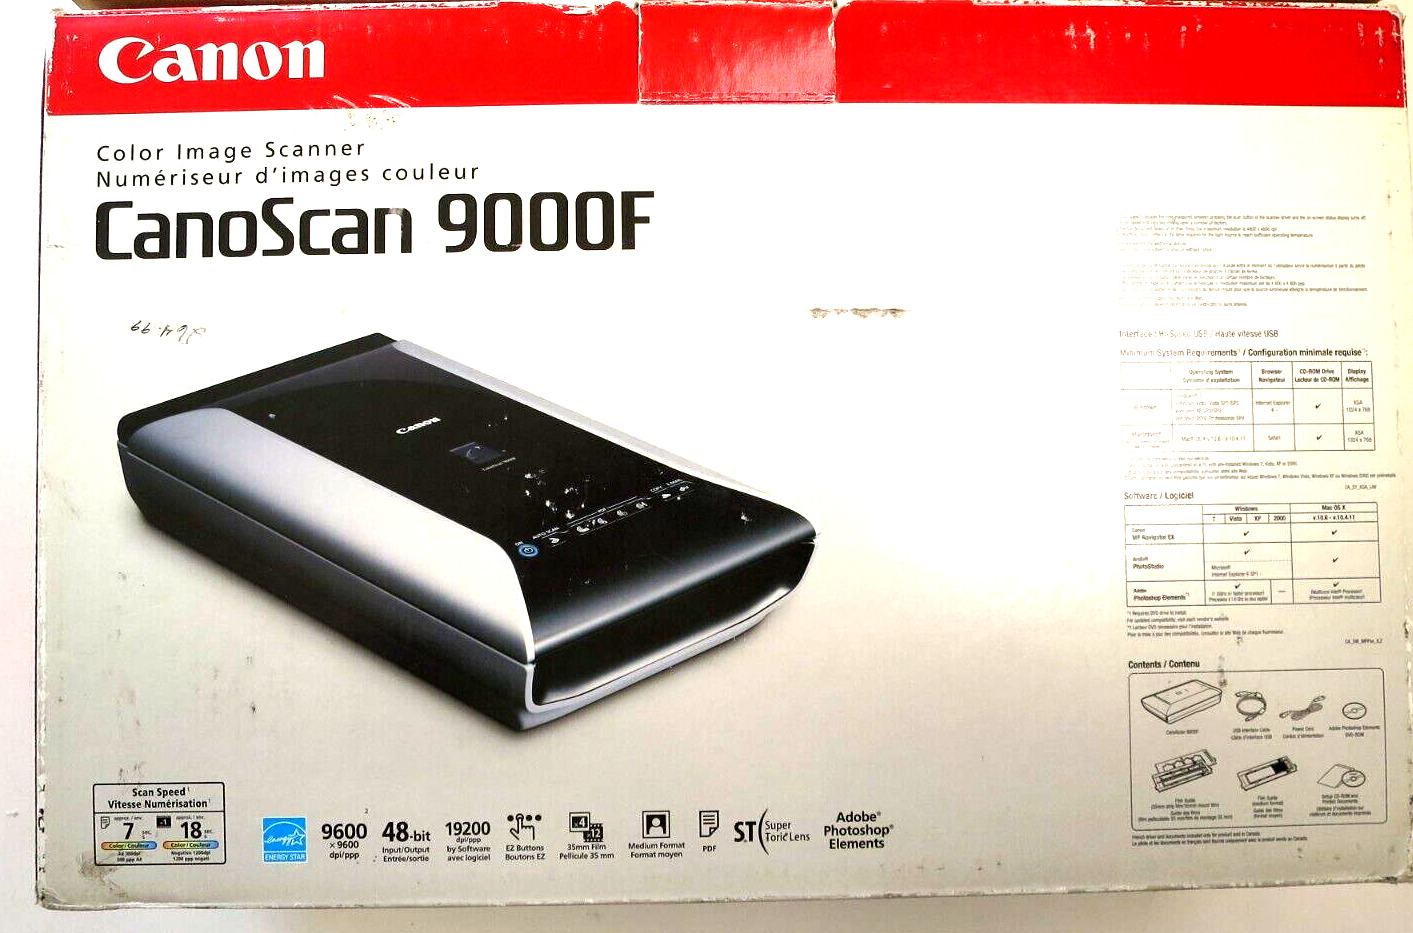 Canon CanoScan 9000F Color Image Flatbed Scanner 4207B002 IN BOX